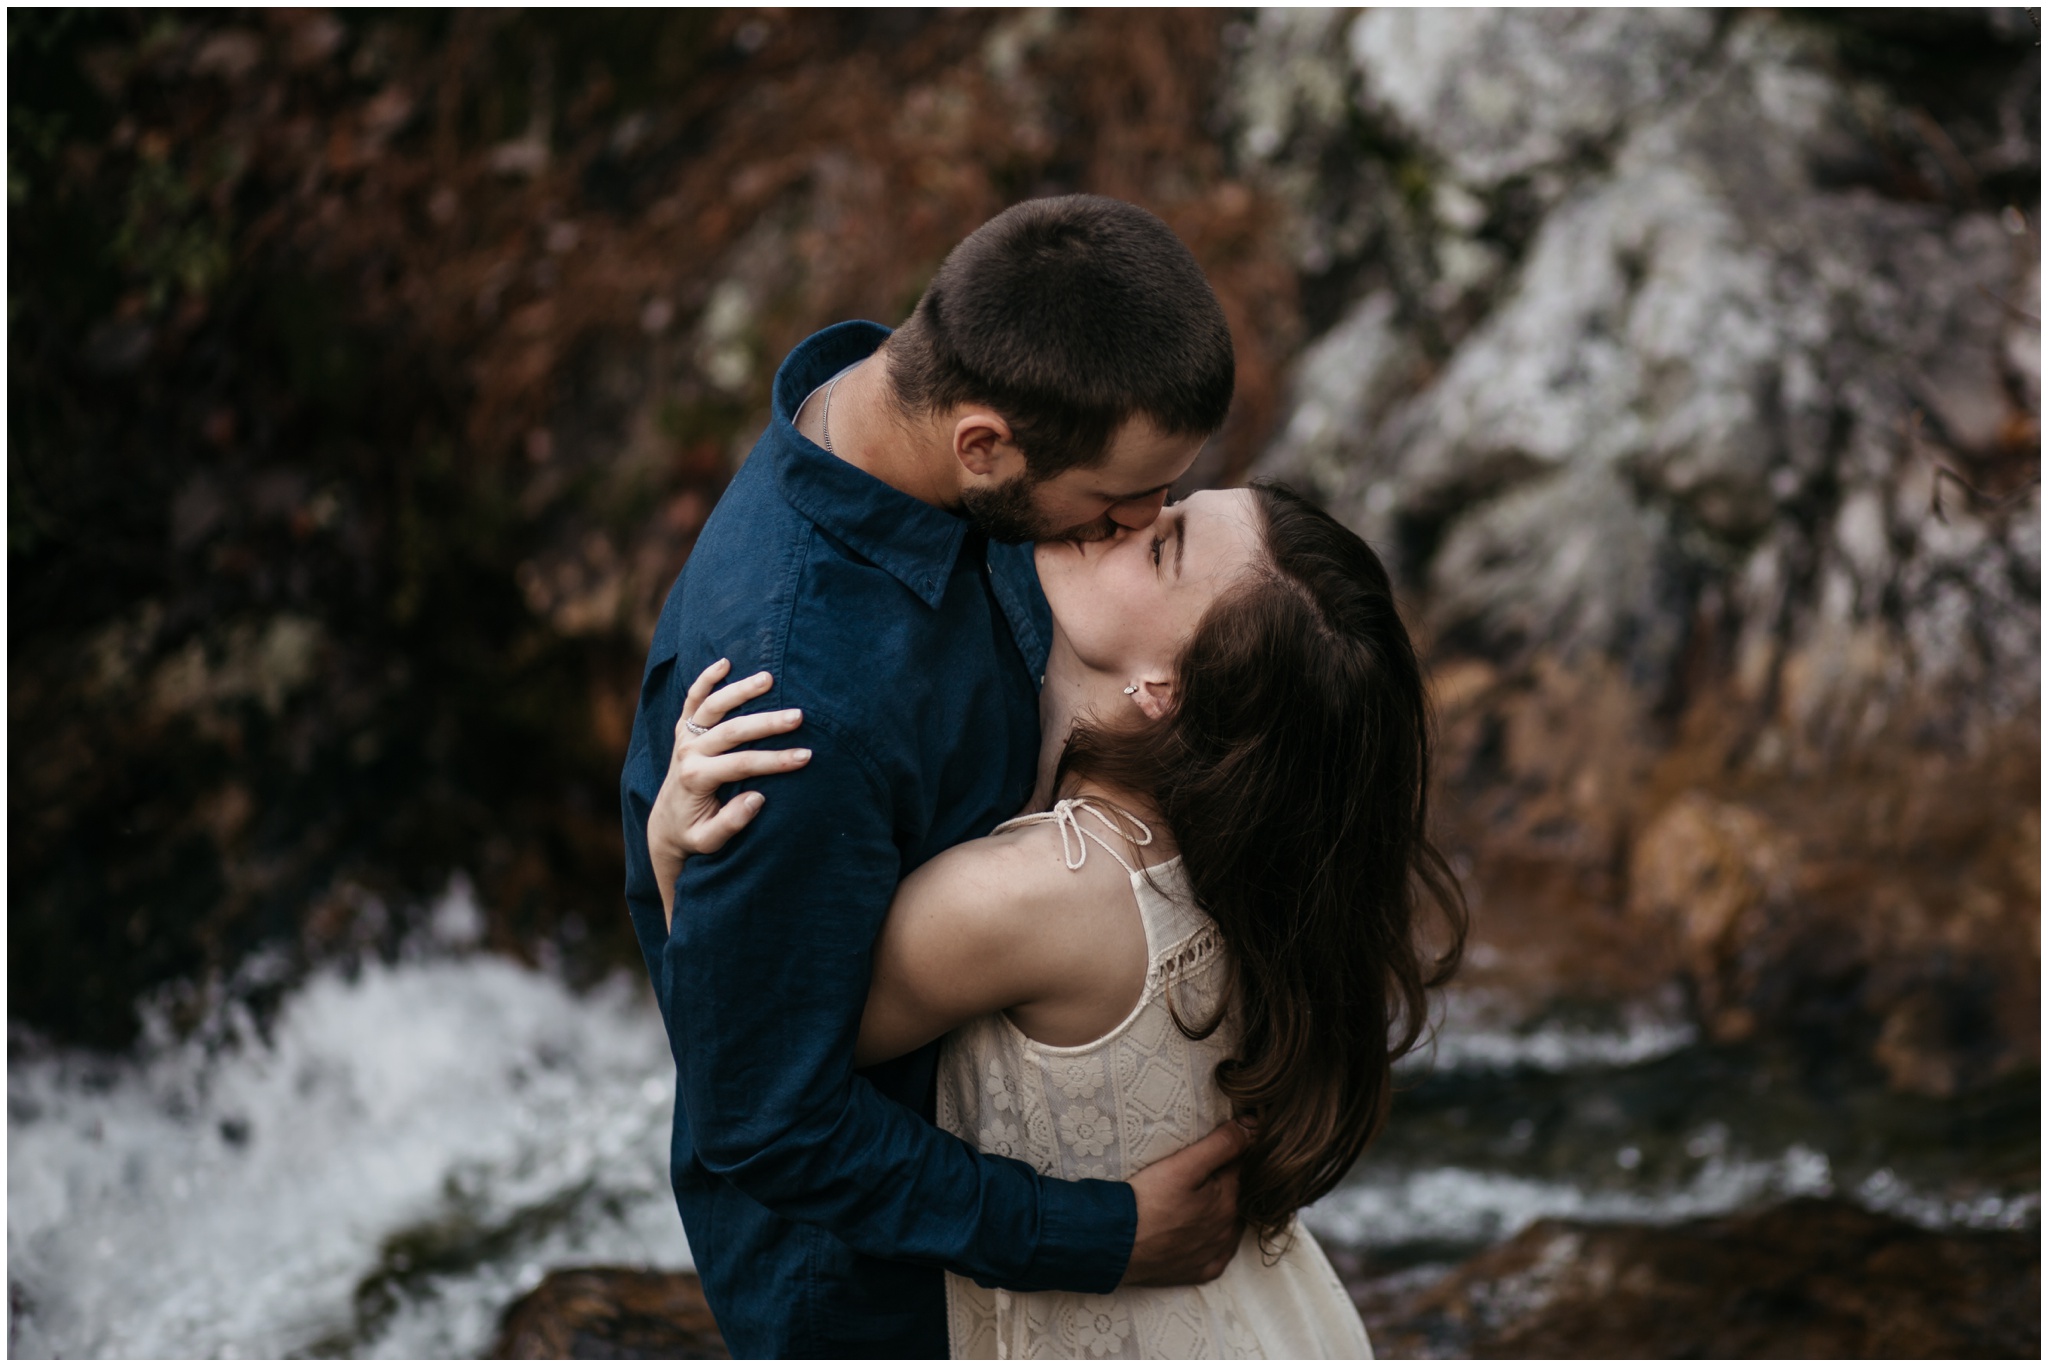 The Morros Photography Maddie and Jake Engagament session at Oak Mountain State Park Alabama_0102.jpg